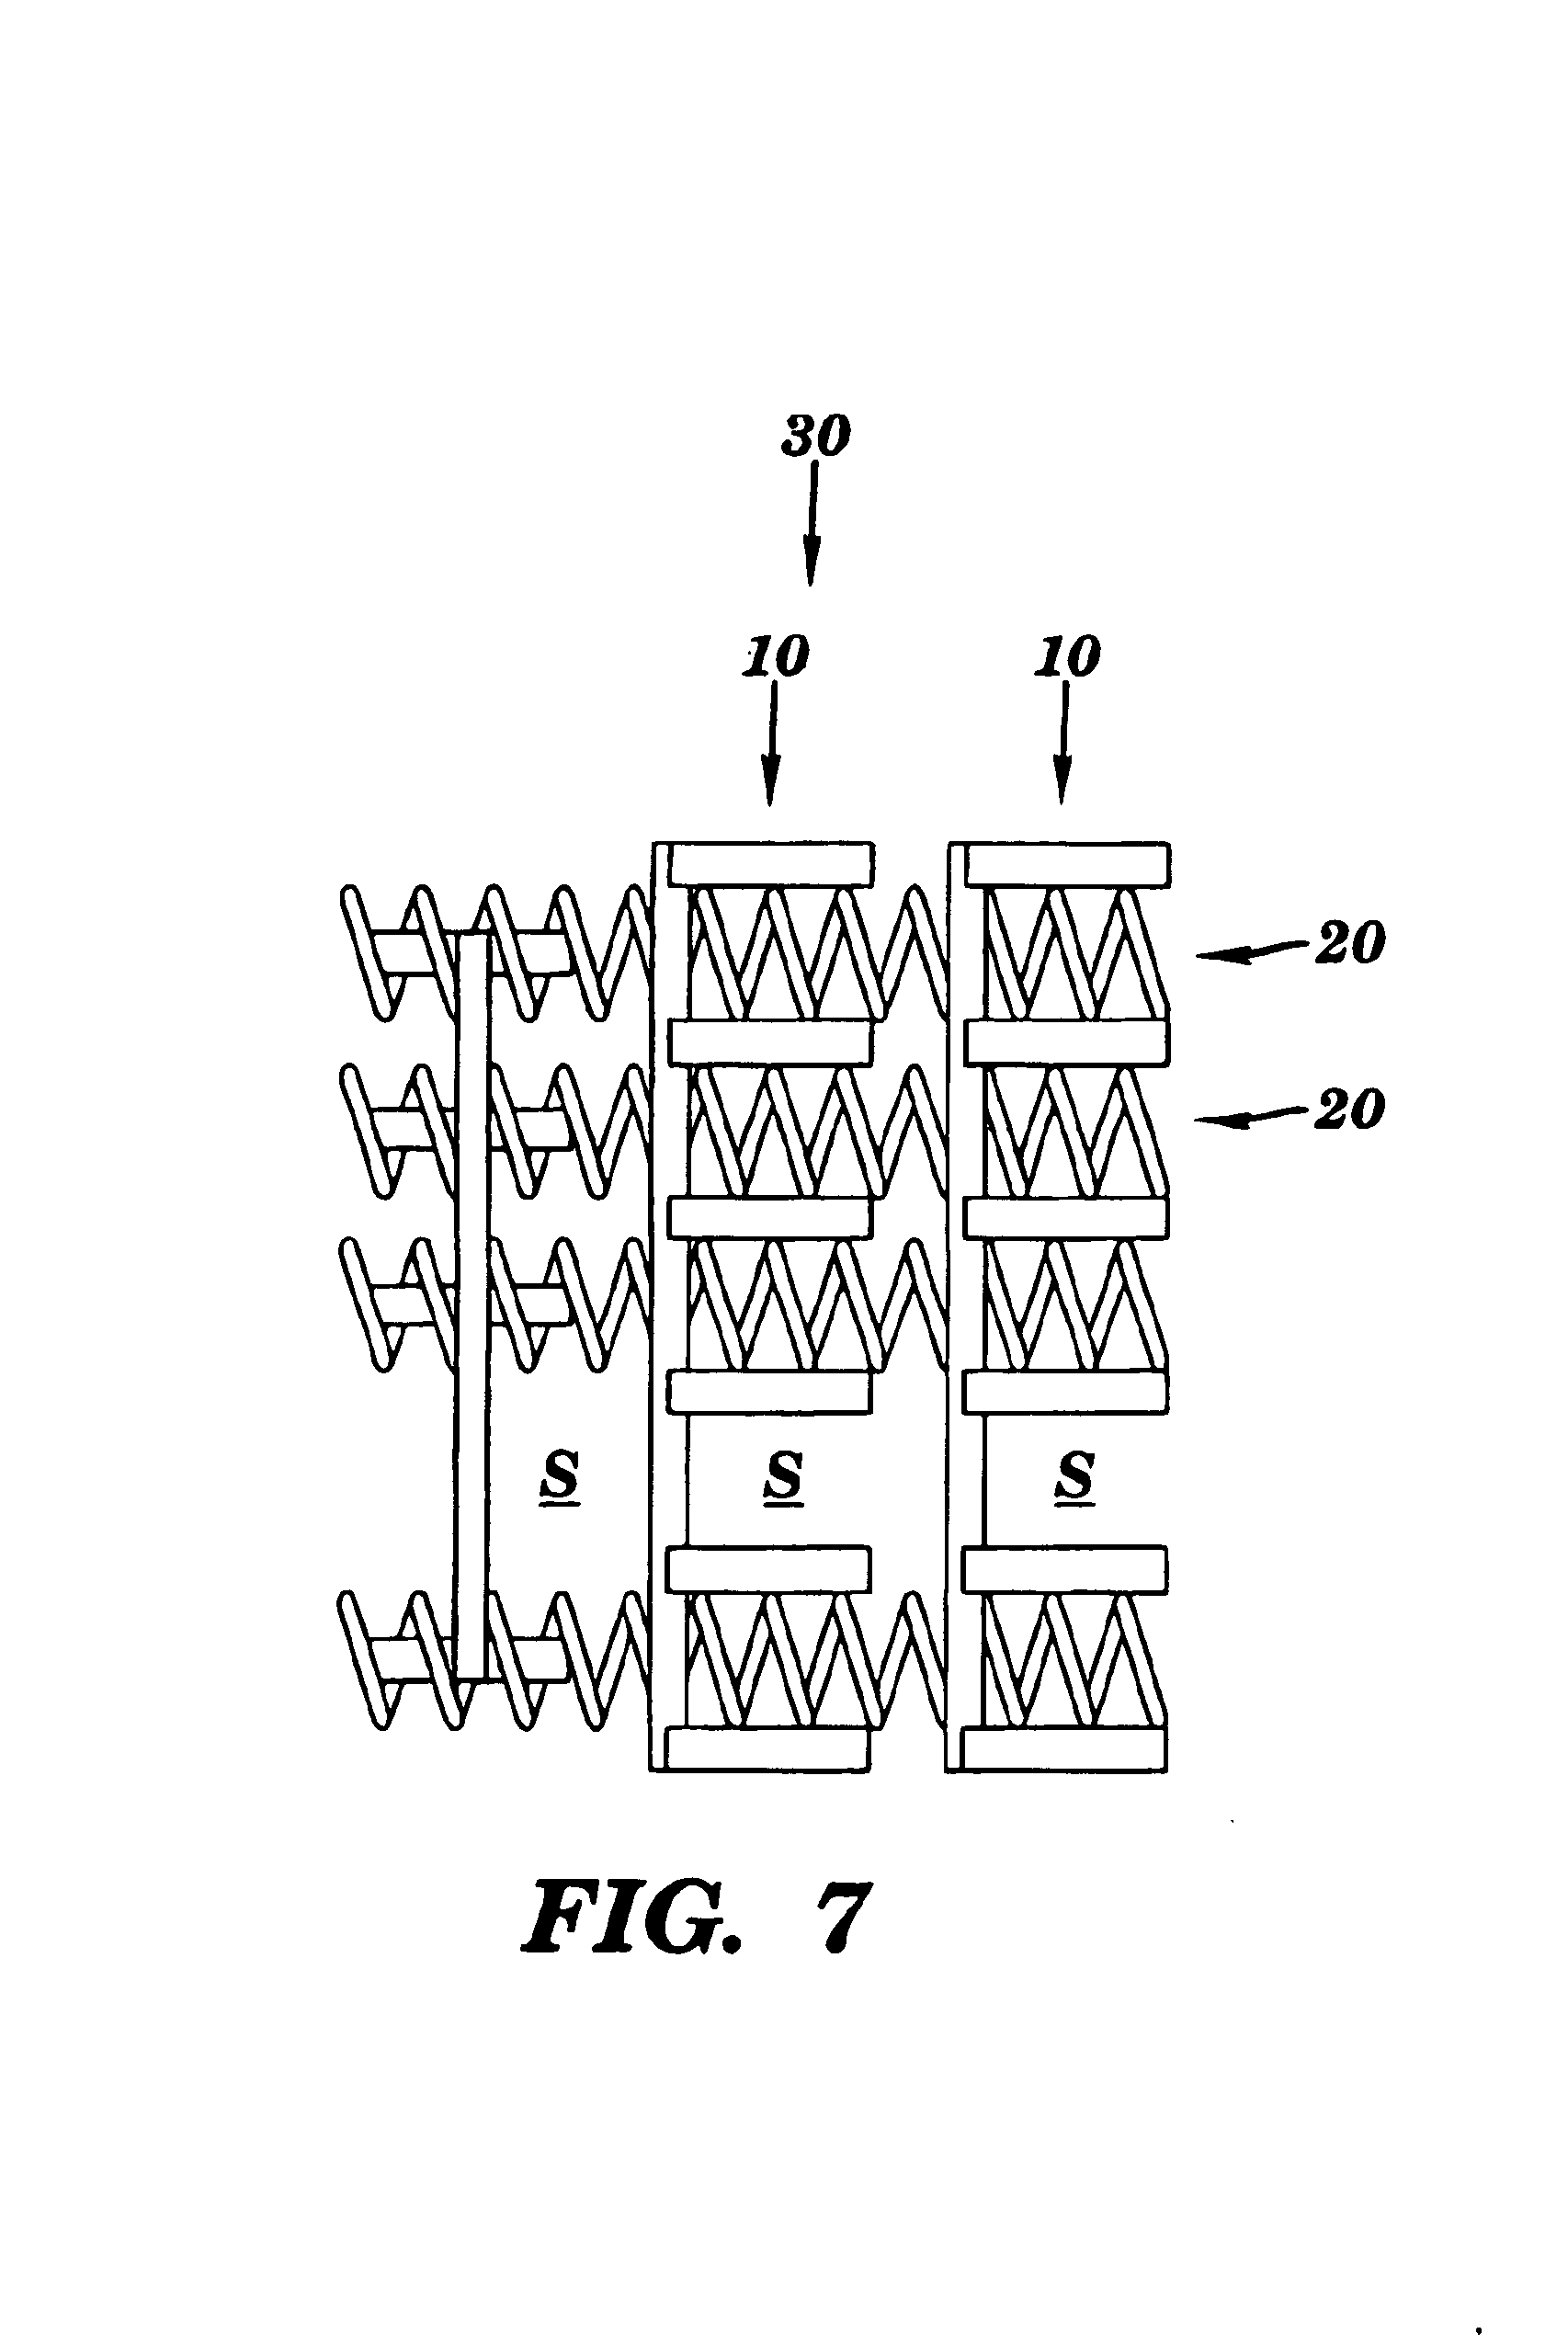 Multi-use fluid collection and transport apparatus